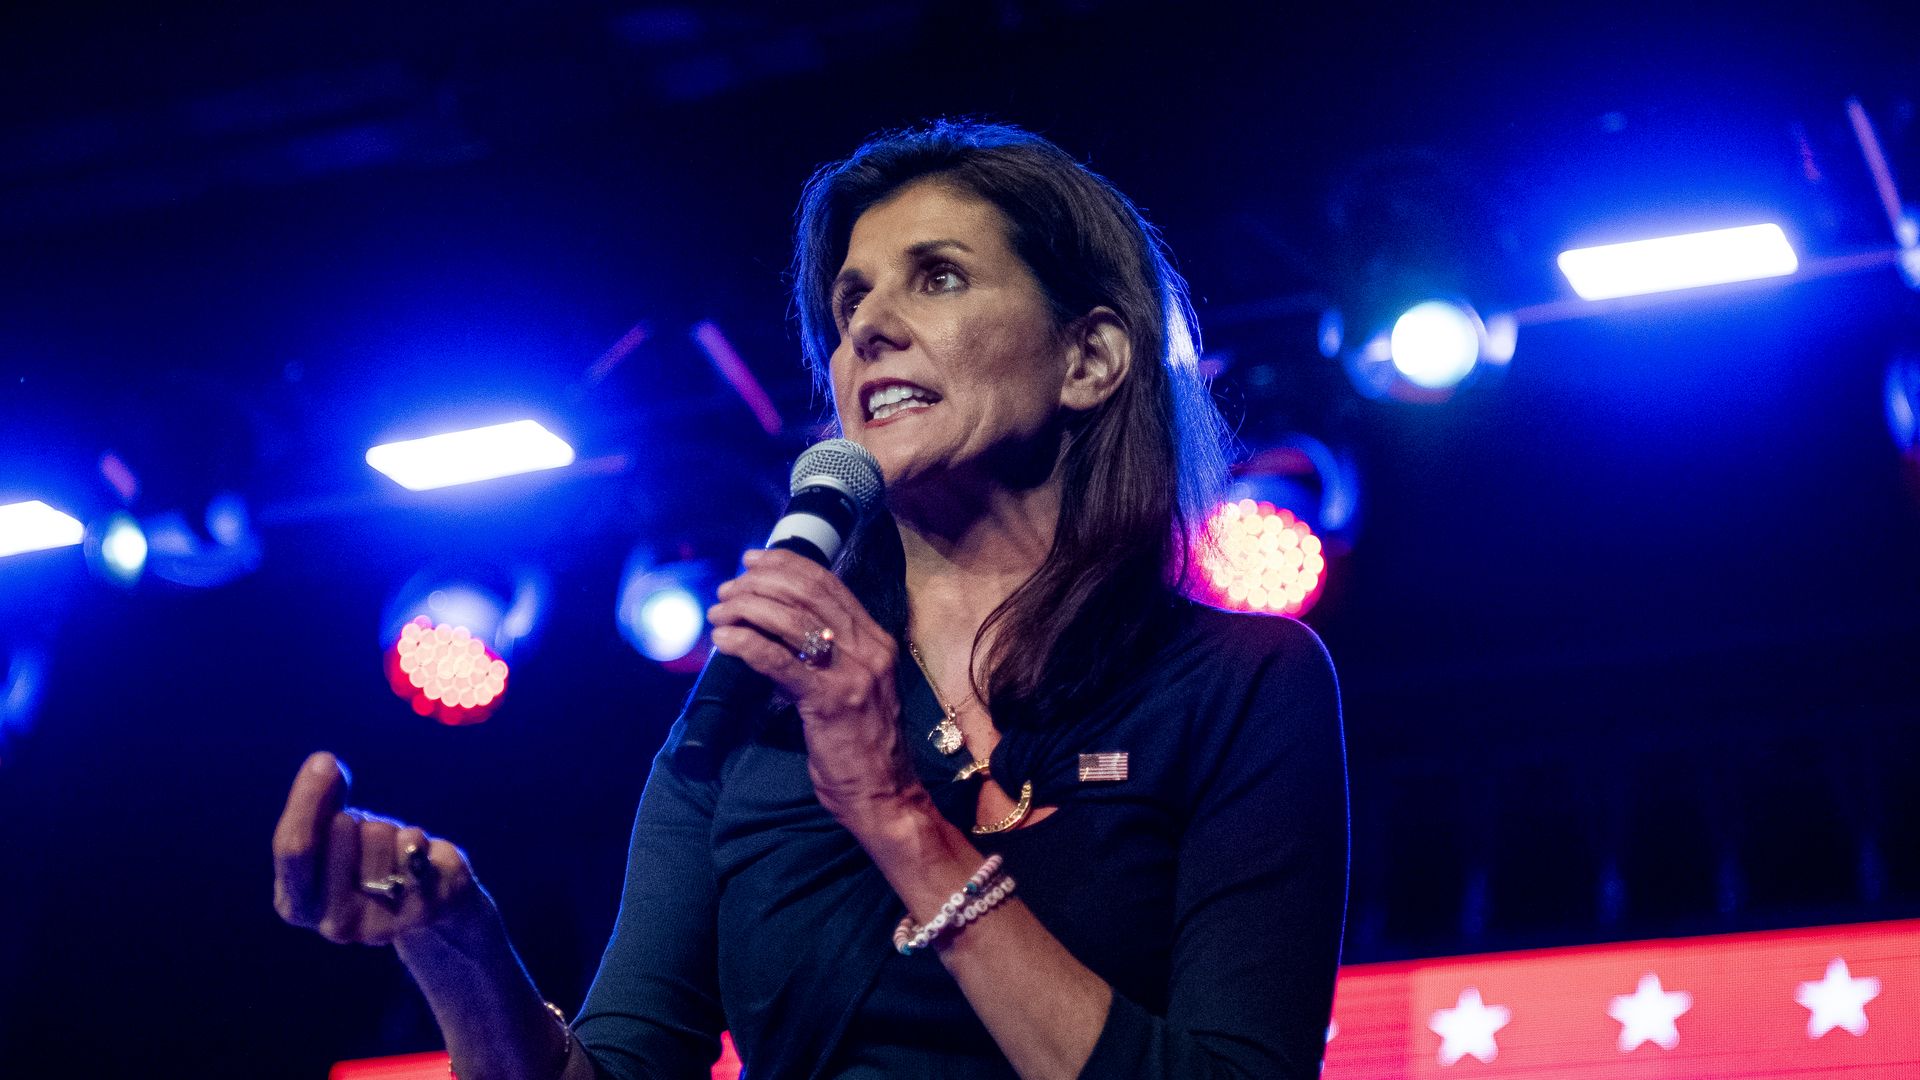 NIkki Haley, wearing a blue blouse, speaks to a crowd with a microphone.